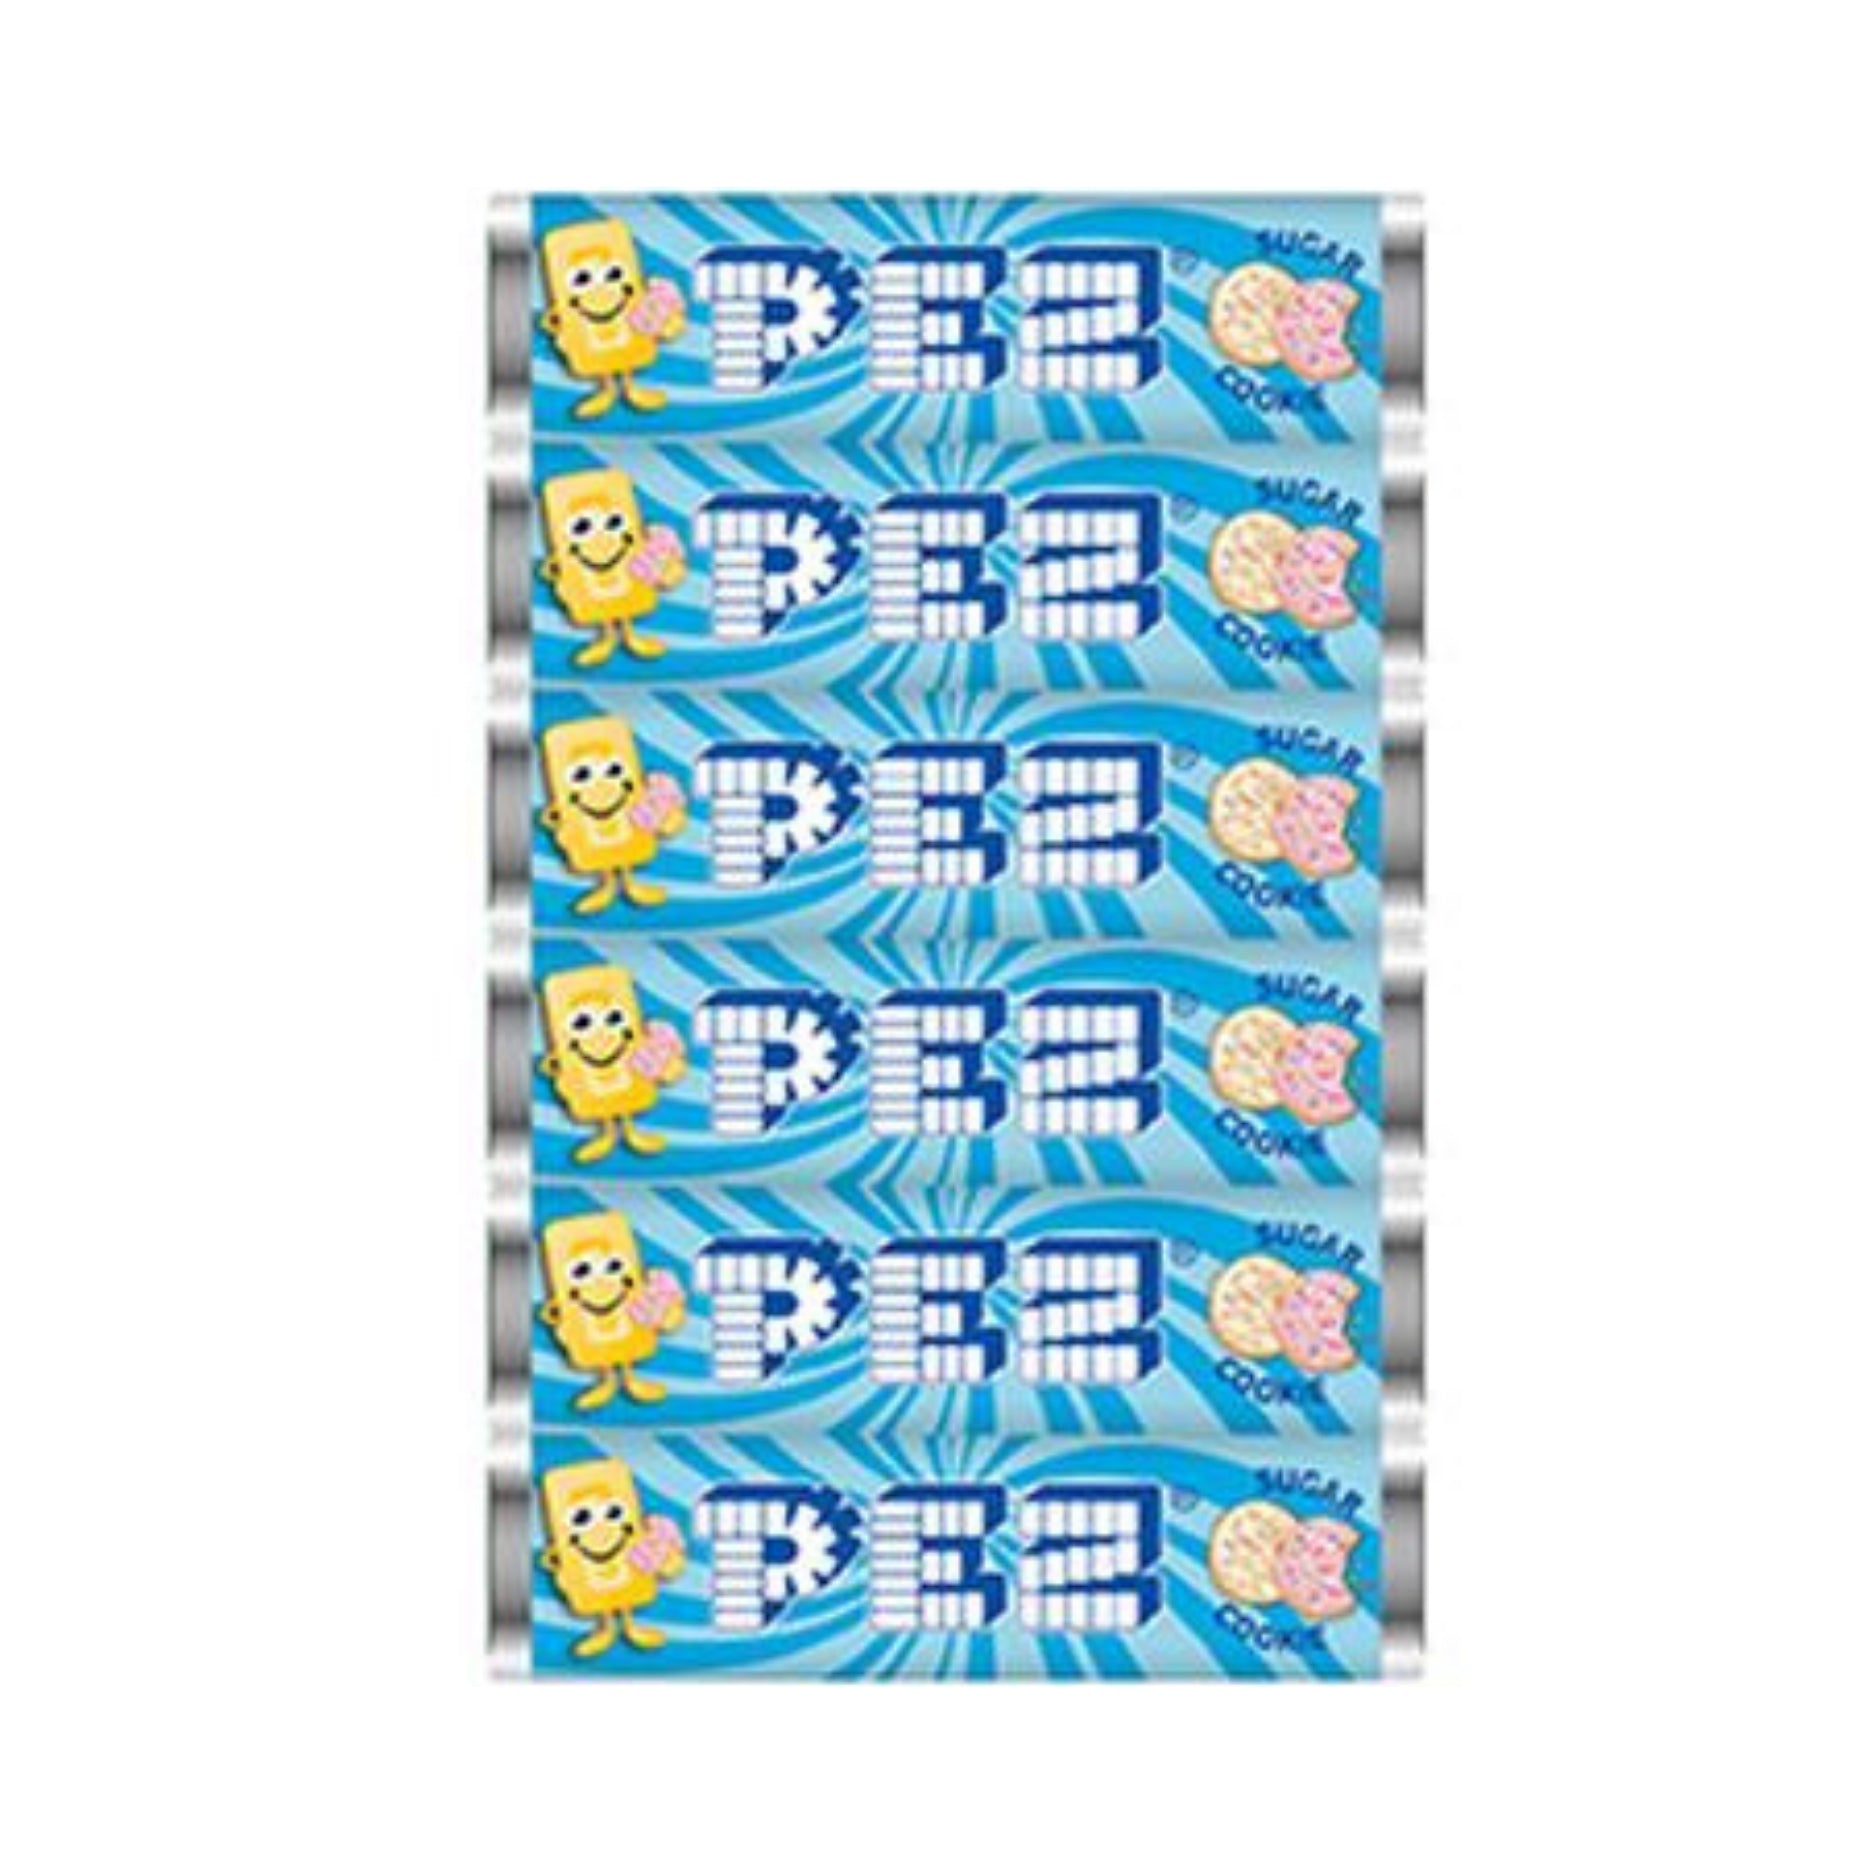 PEZ Sugar Cookie Candy Refill Rolls 6 Pieces - 12 Pack